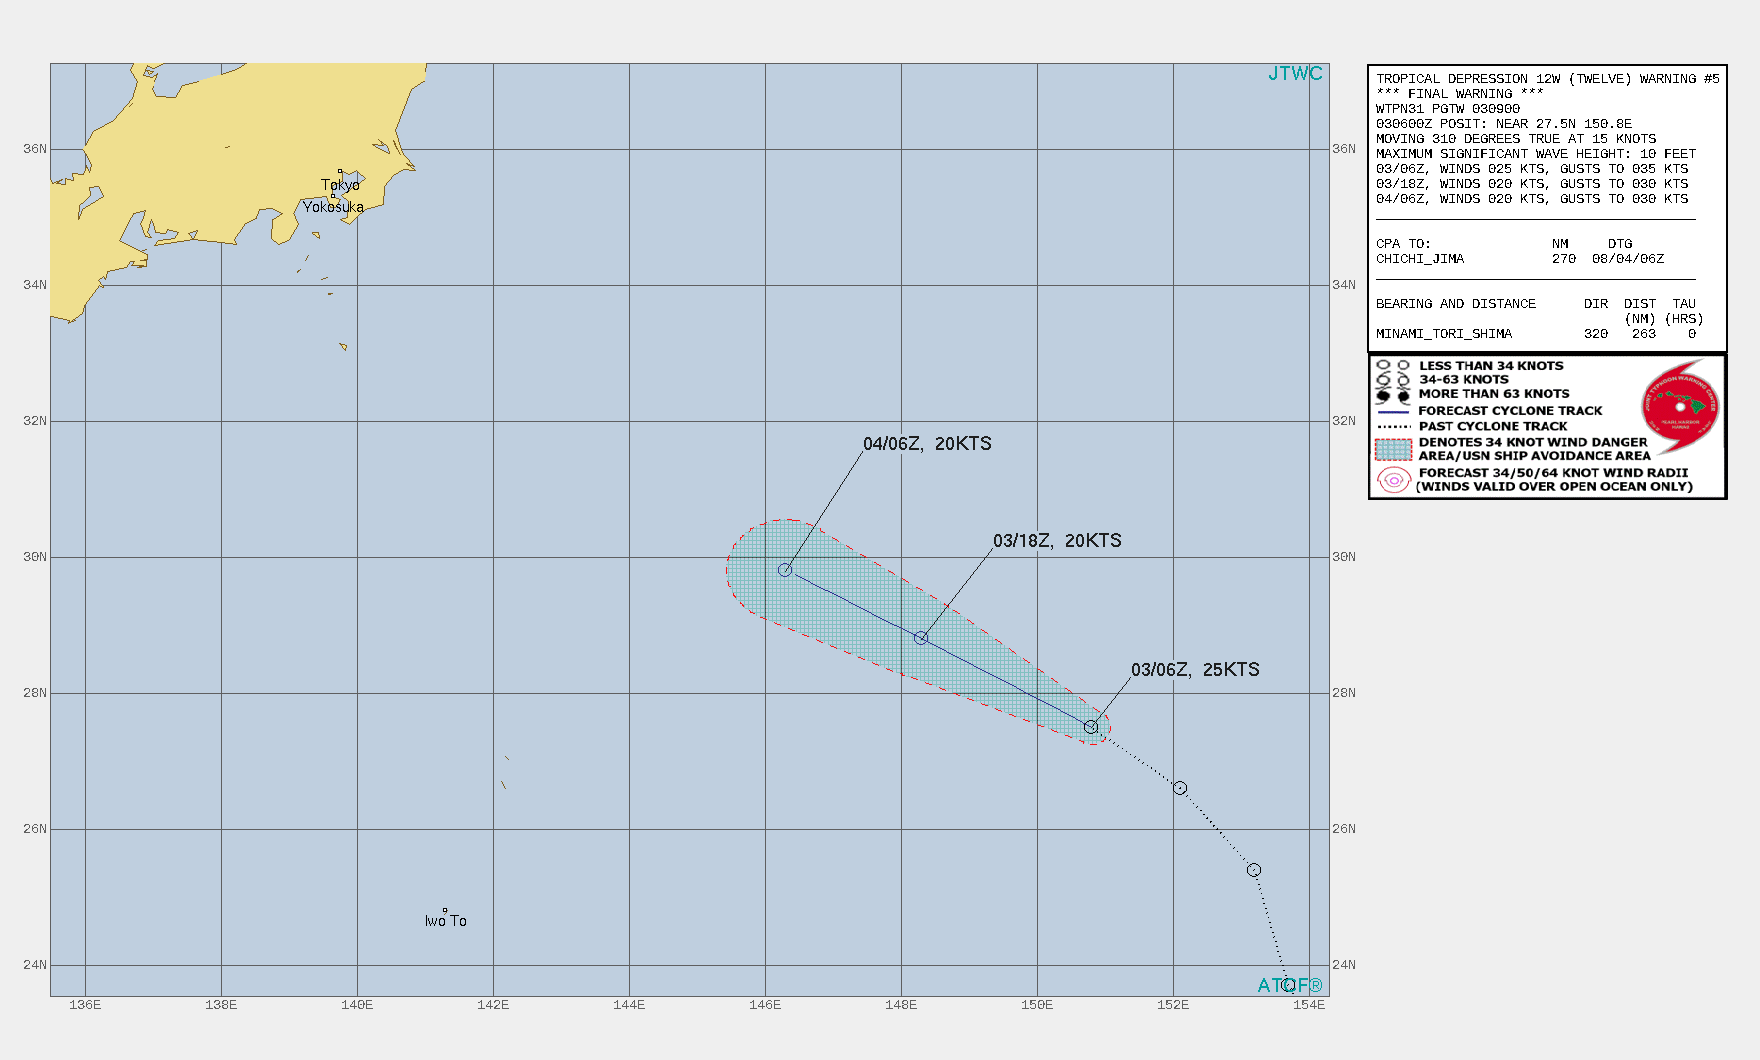 REMNANTS OF TD 12W. WARNING 5/FINAL ISSUED AT 03/09UTC.